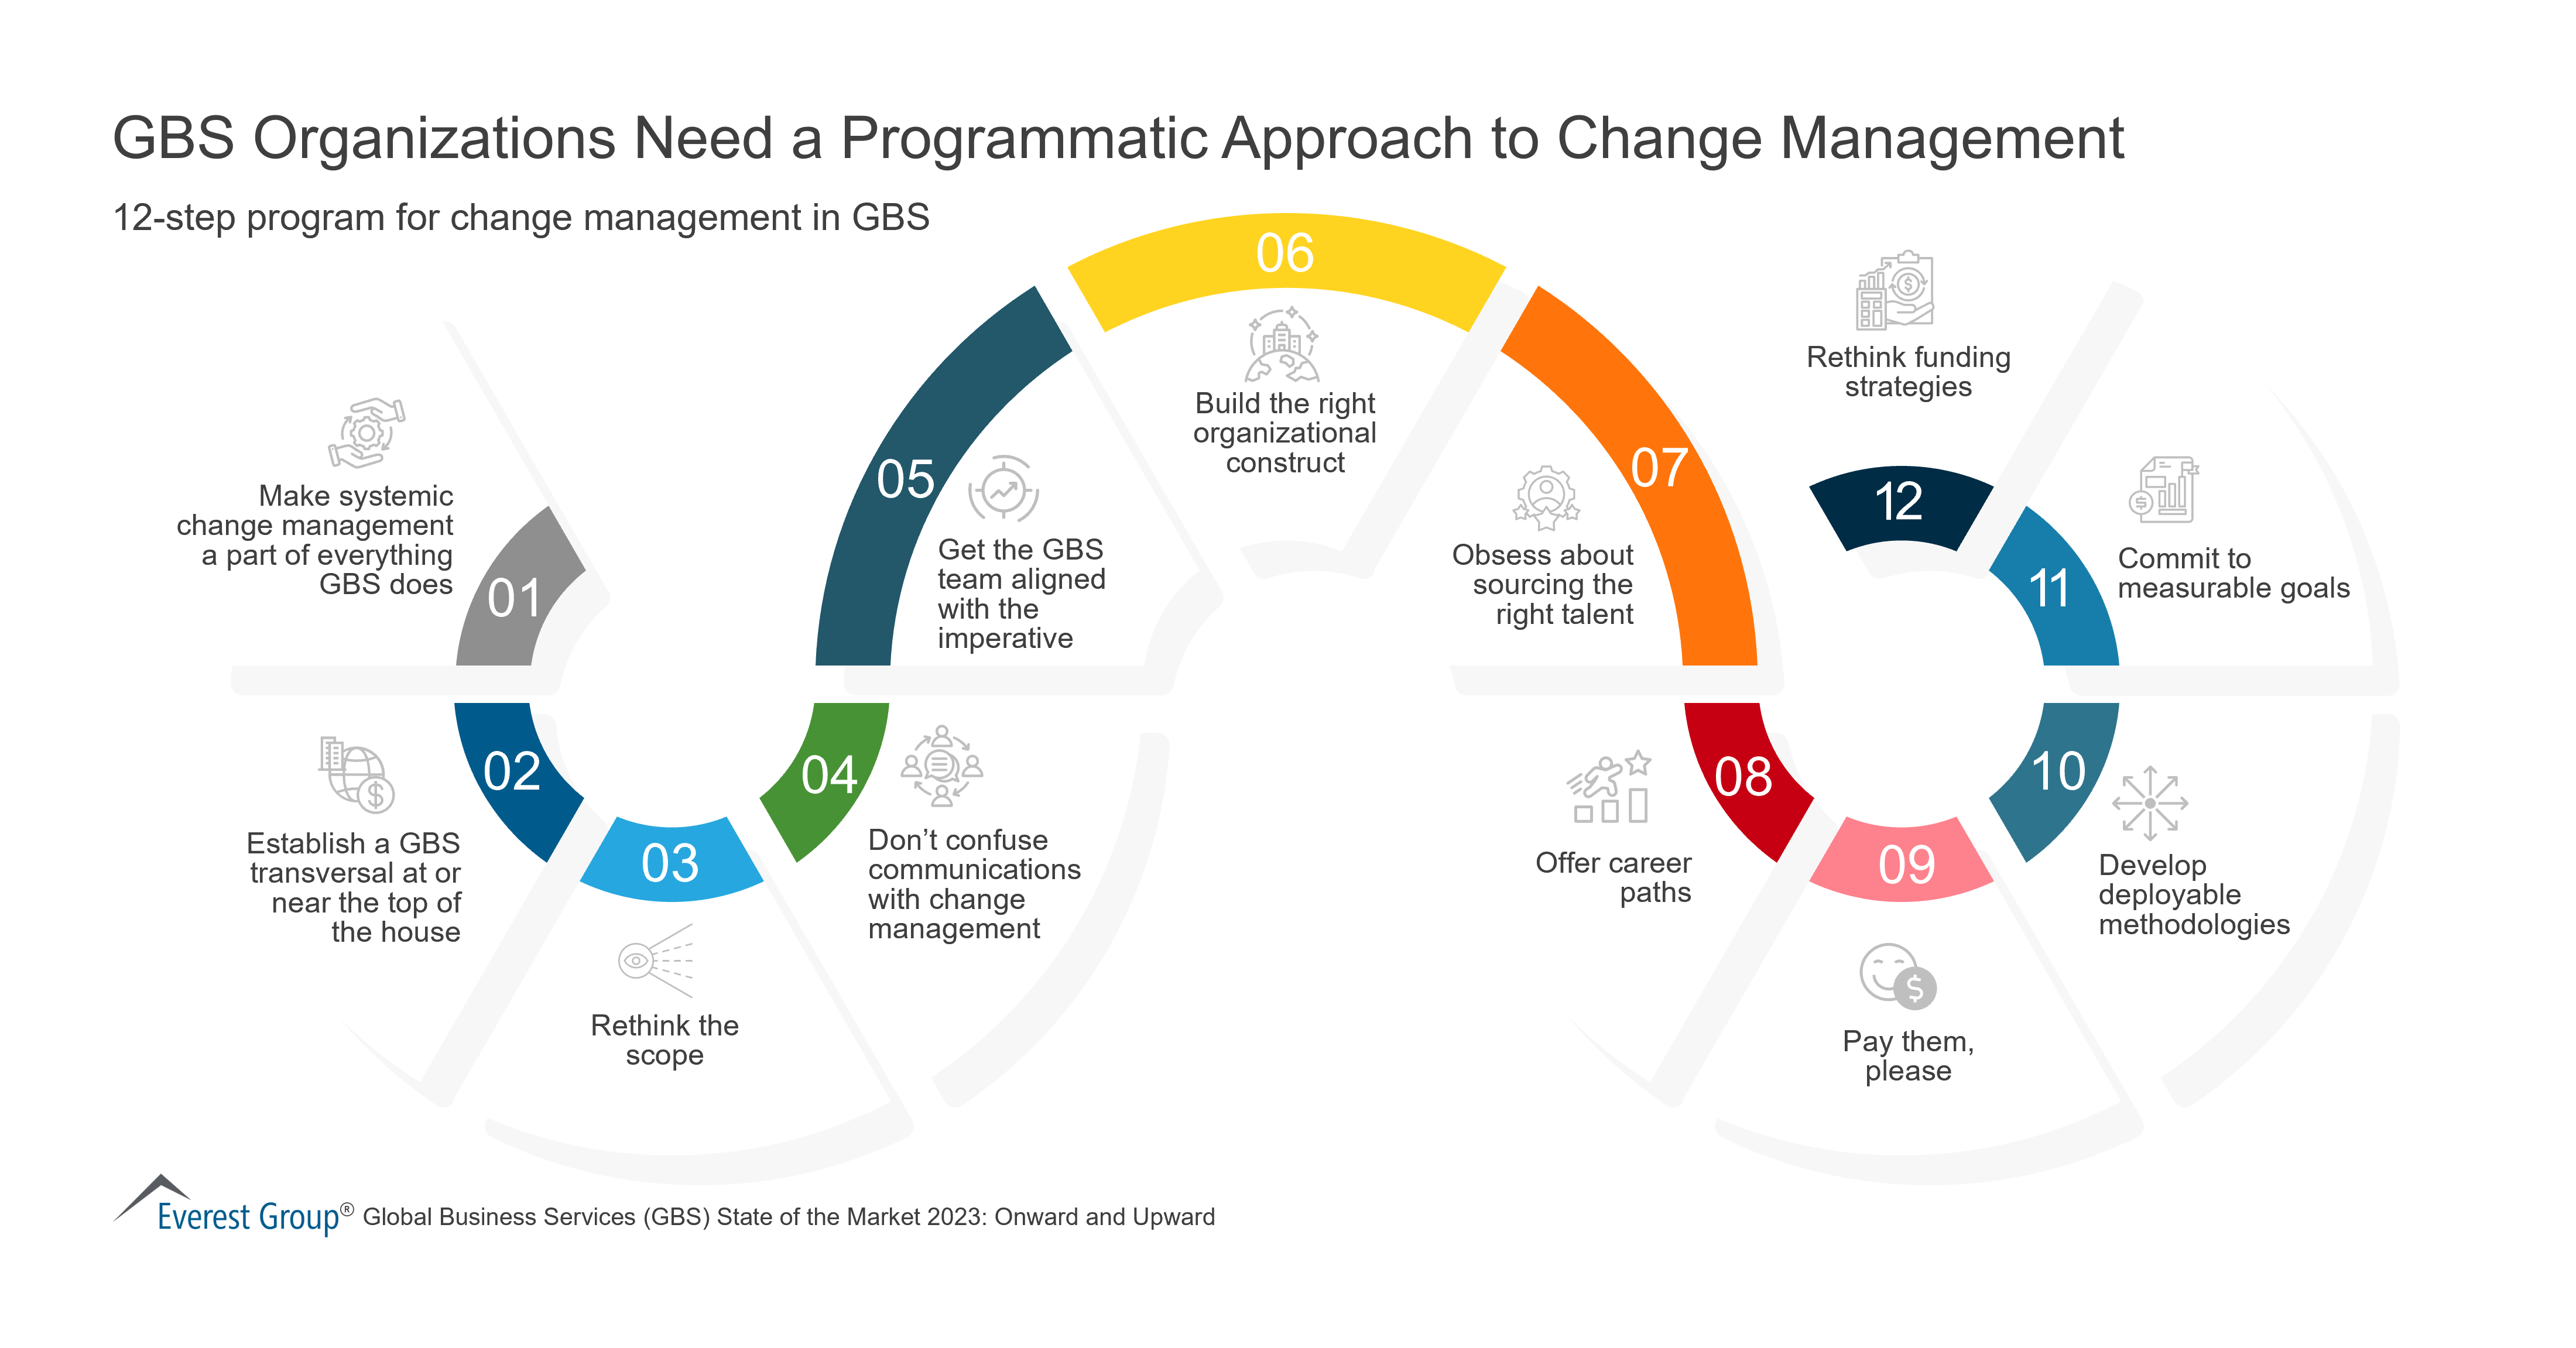 GBS Organizations Need a Programmatic Approach to Change Management